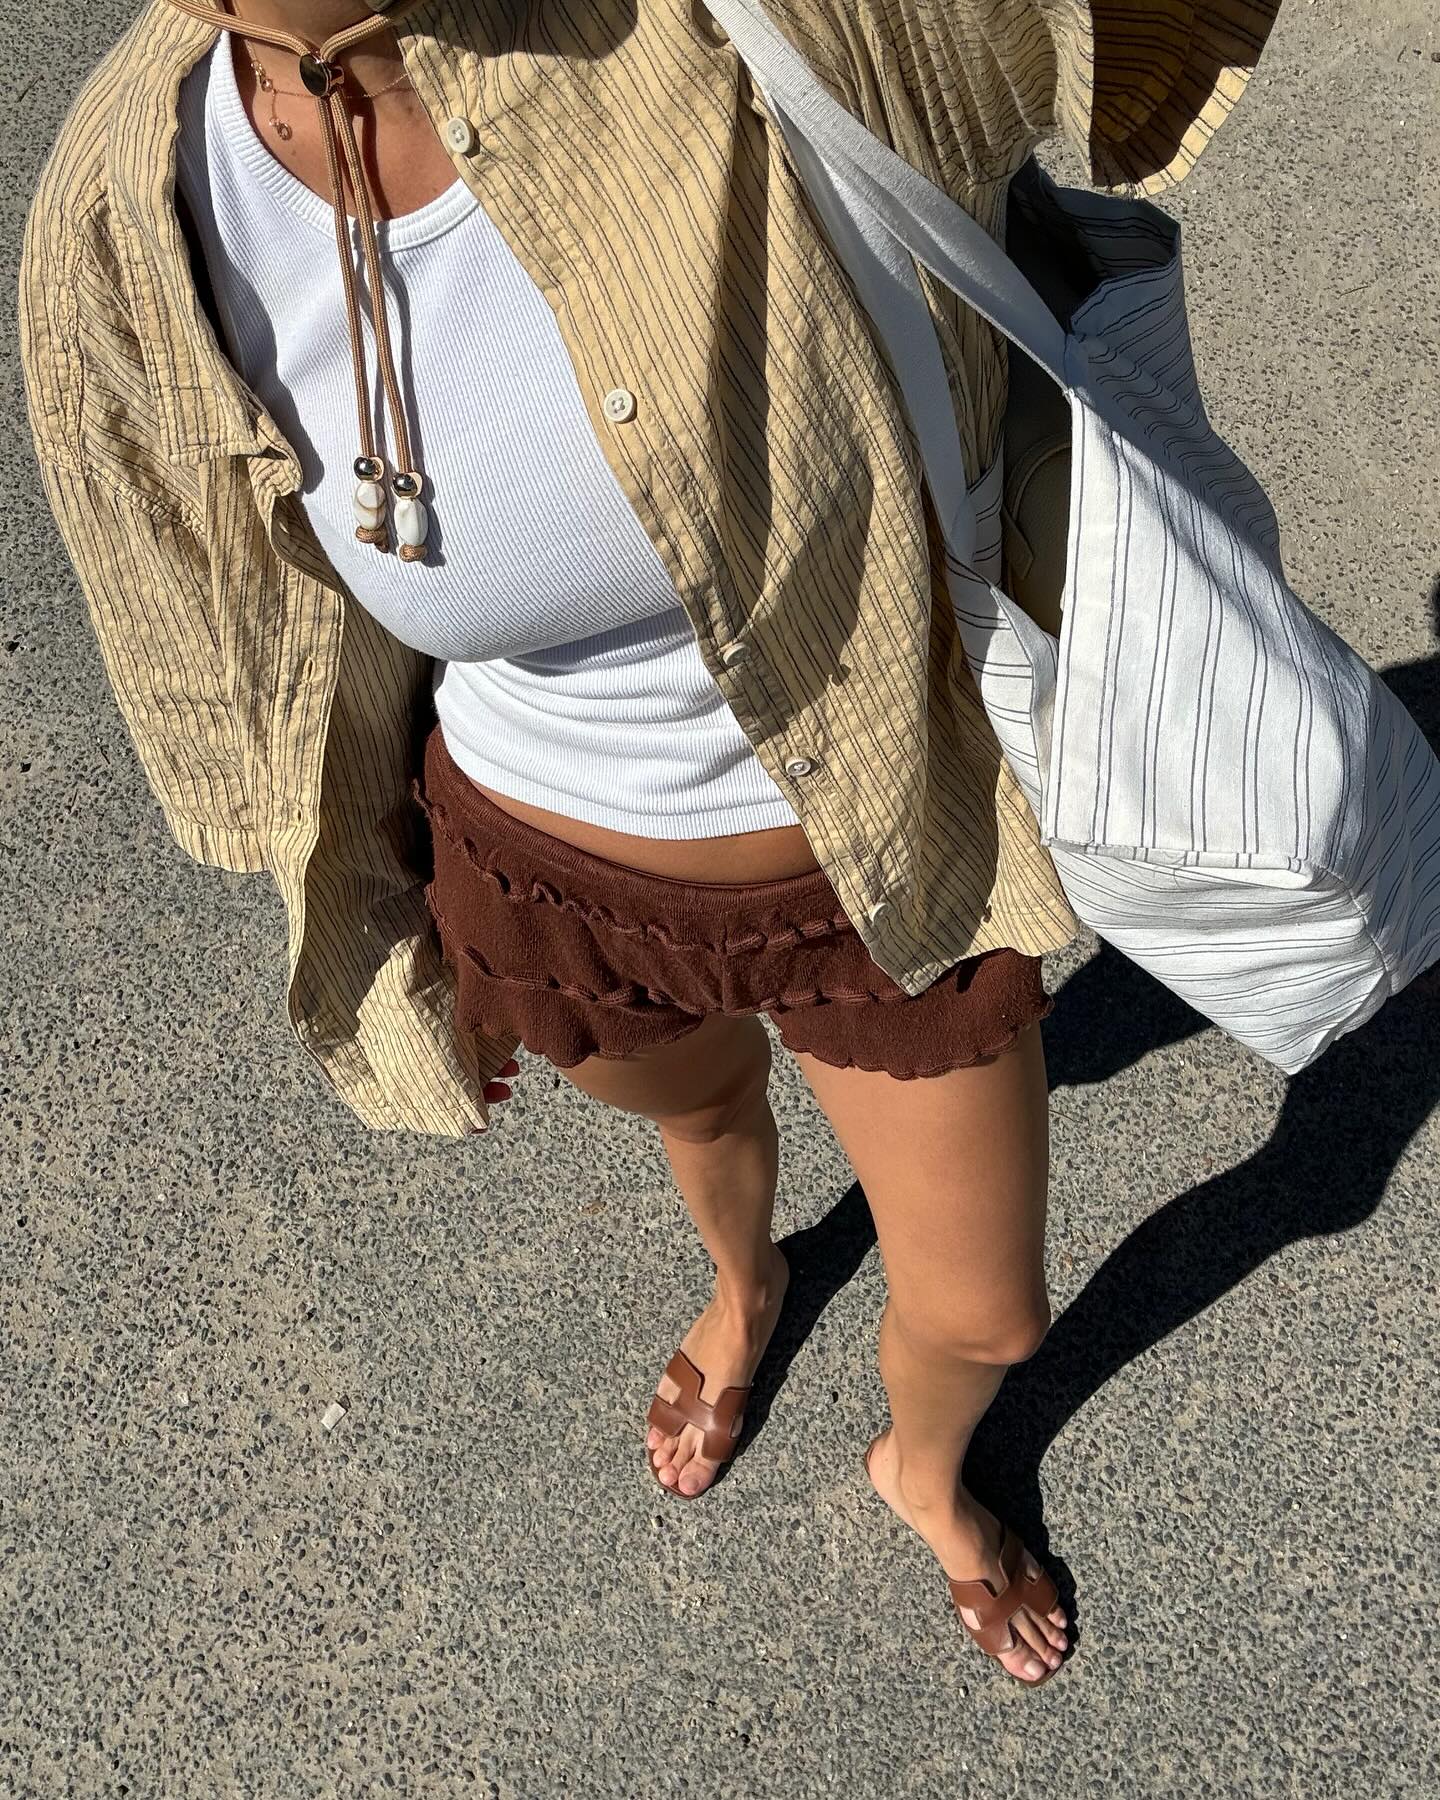 A woman taking an outfit selfie wearing a button-down shirt, a white tank top, brown short shorts, and brown Hermès flat slides.